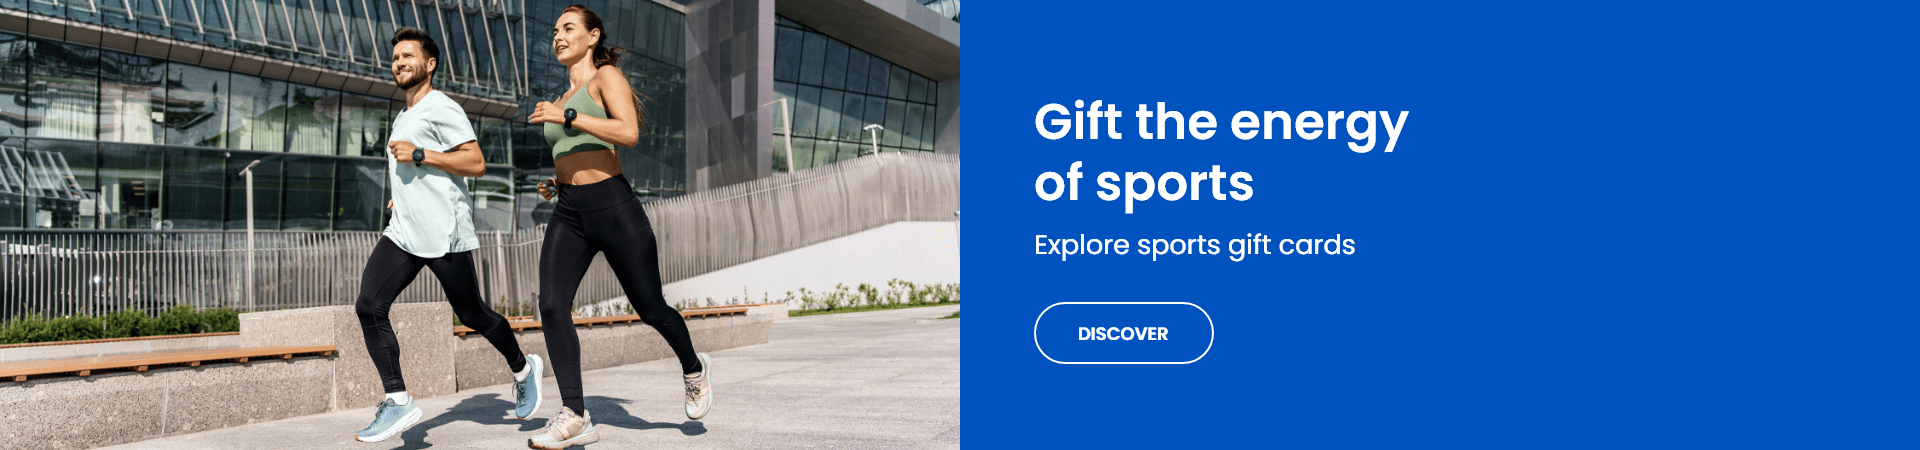 Give the energy of sport with our gift cards.